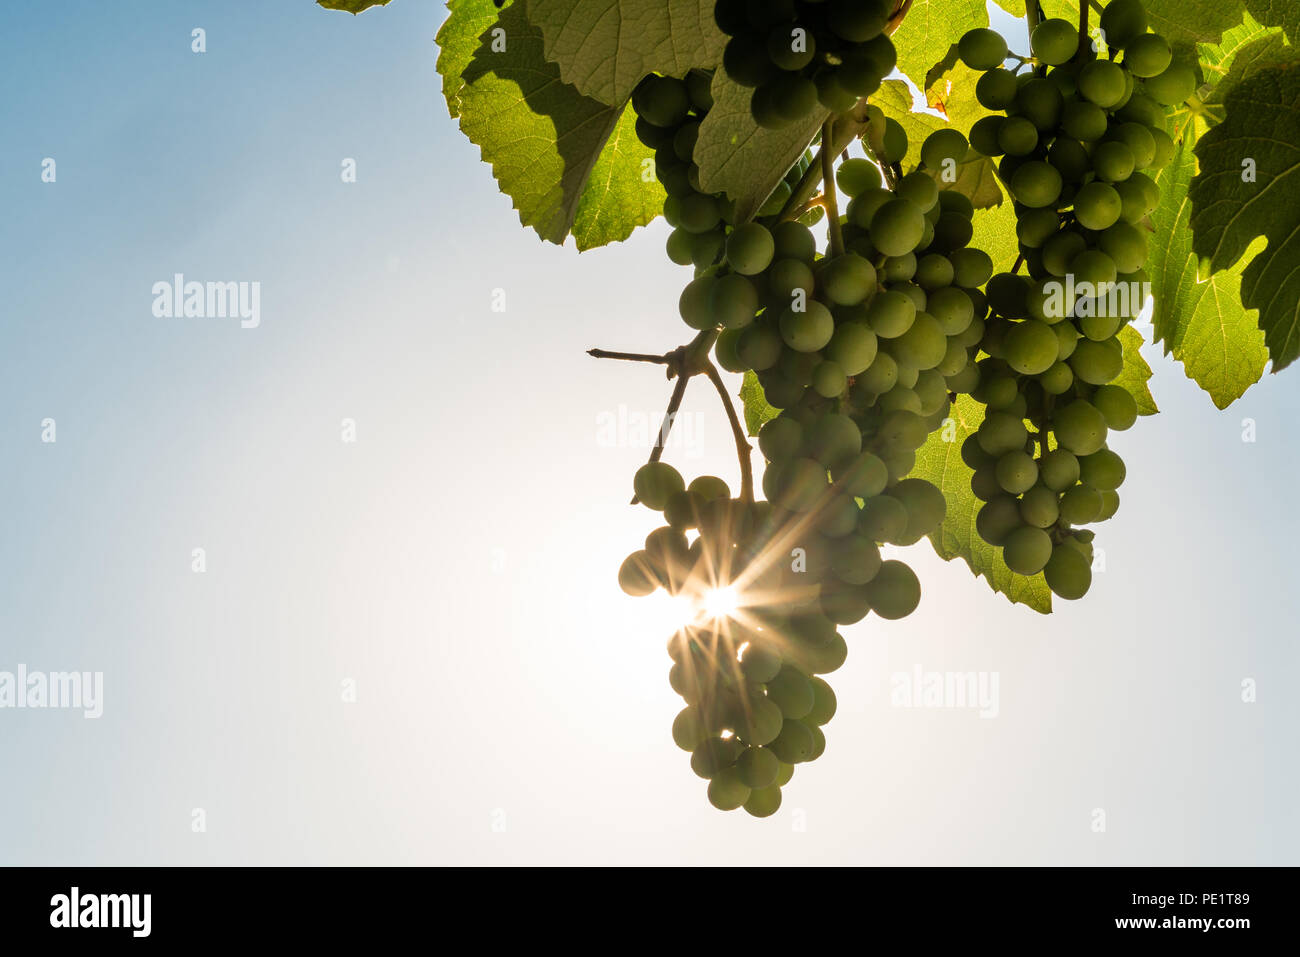 A bunch of grapes hanging around. Stock Photo